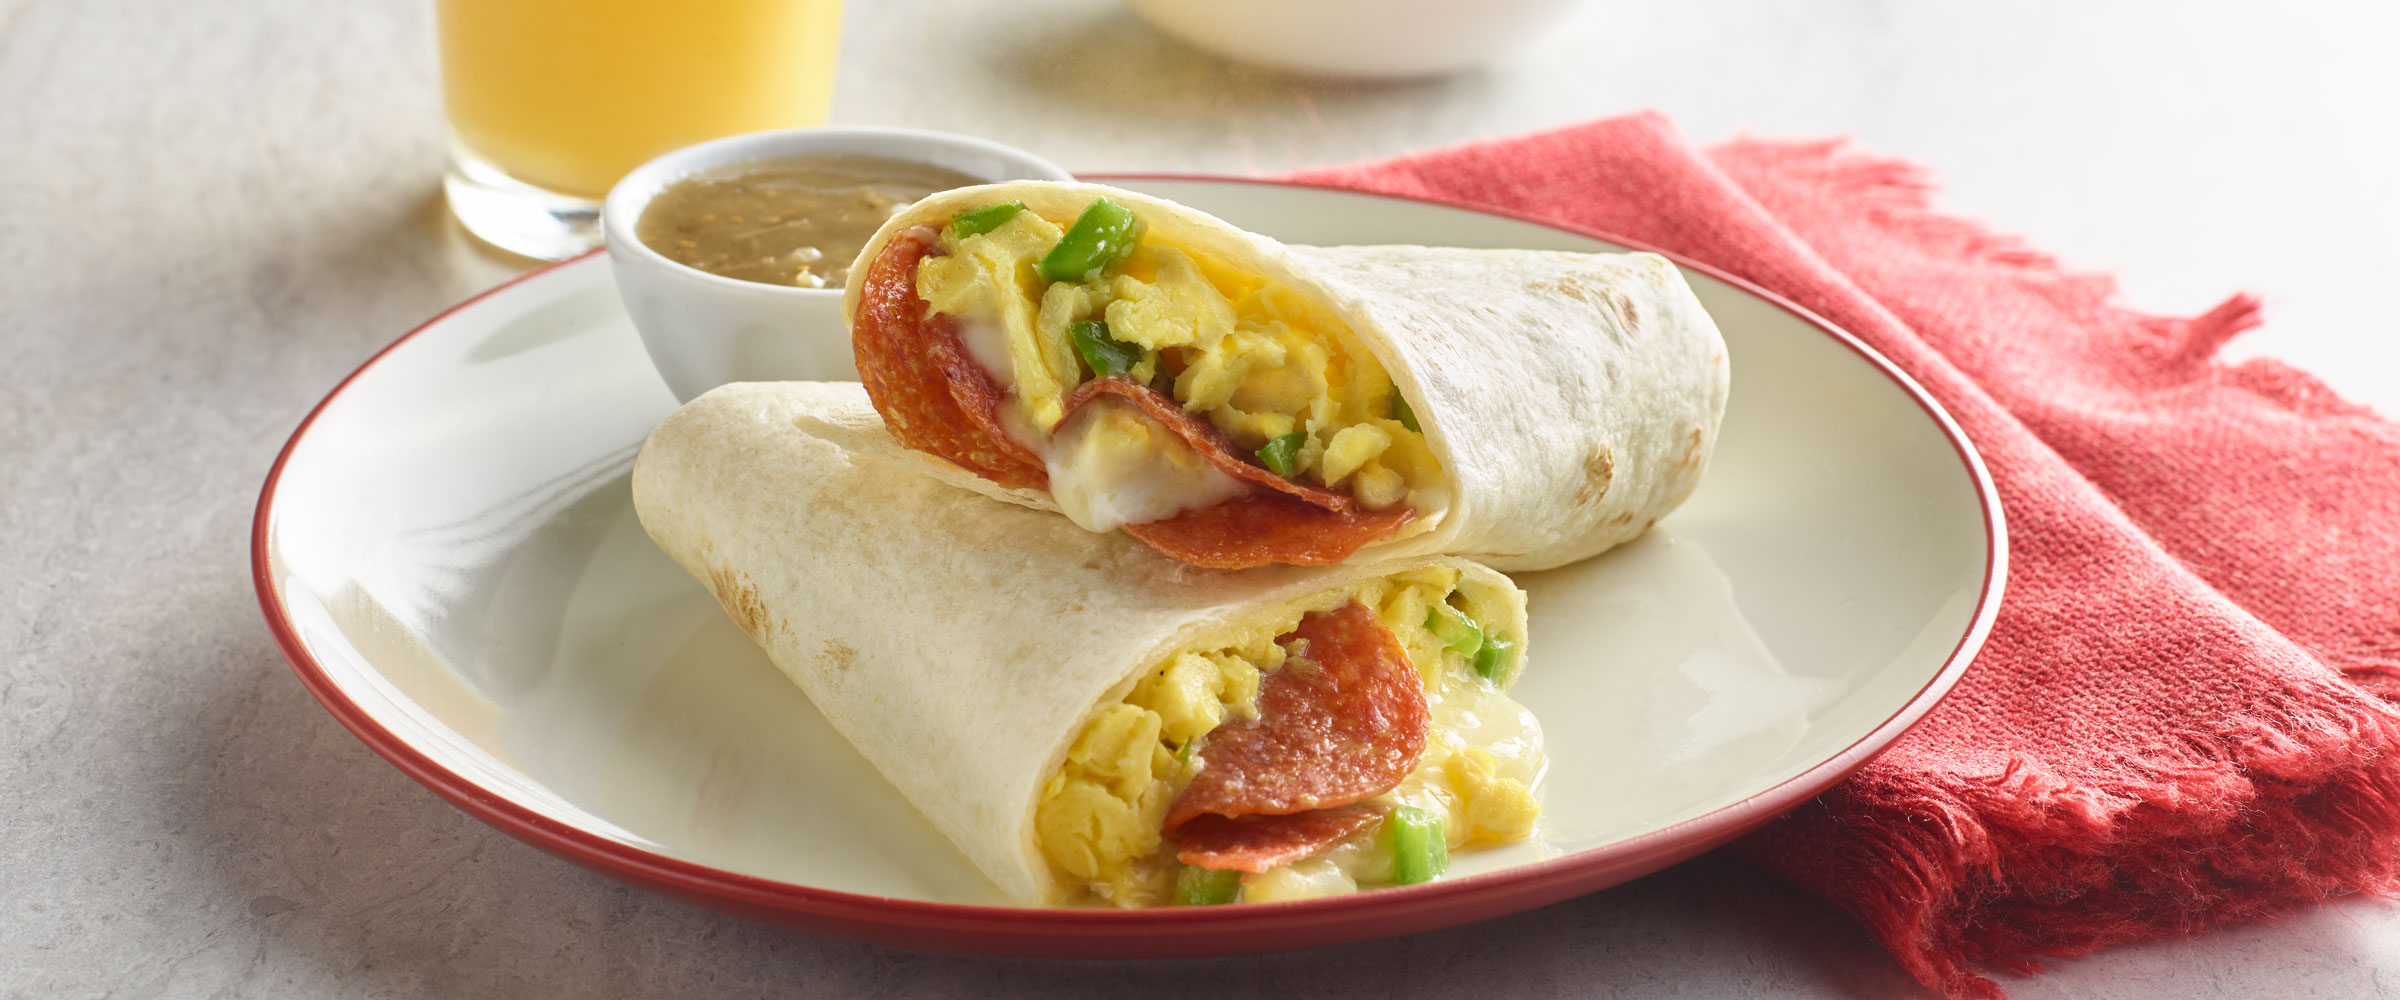 Italian Breakfast Burrito on plate with salsa and red napkin